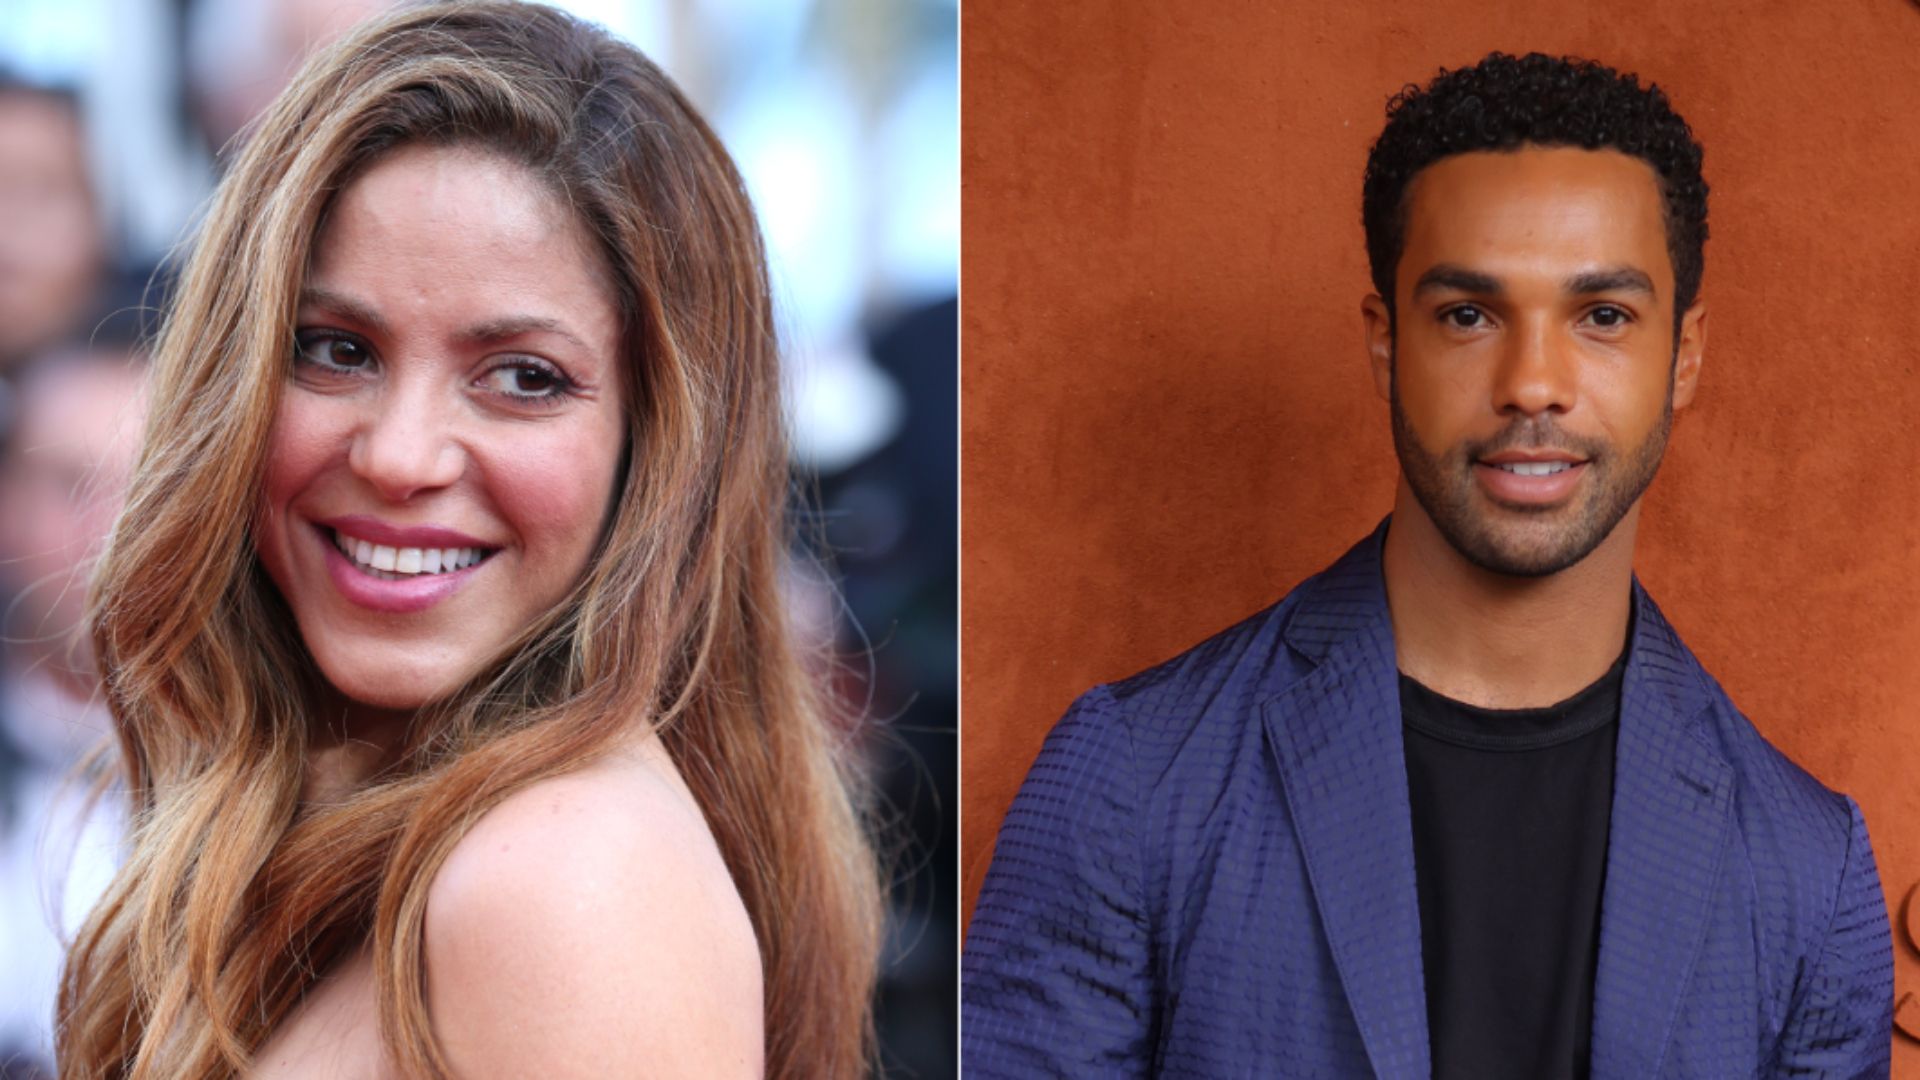 Shakira's rumored new heartthrob beau Lucien Laviscount praises her as 'the most beautiful' woman amid romance